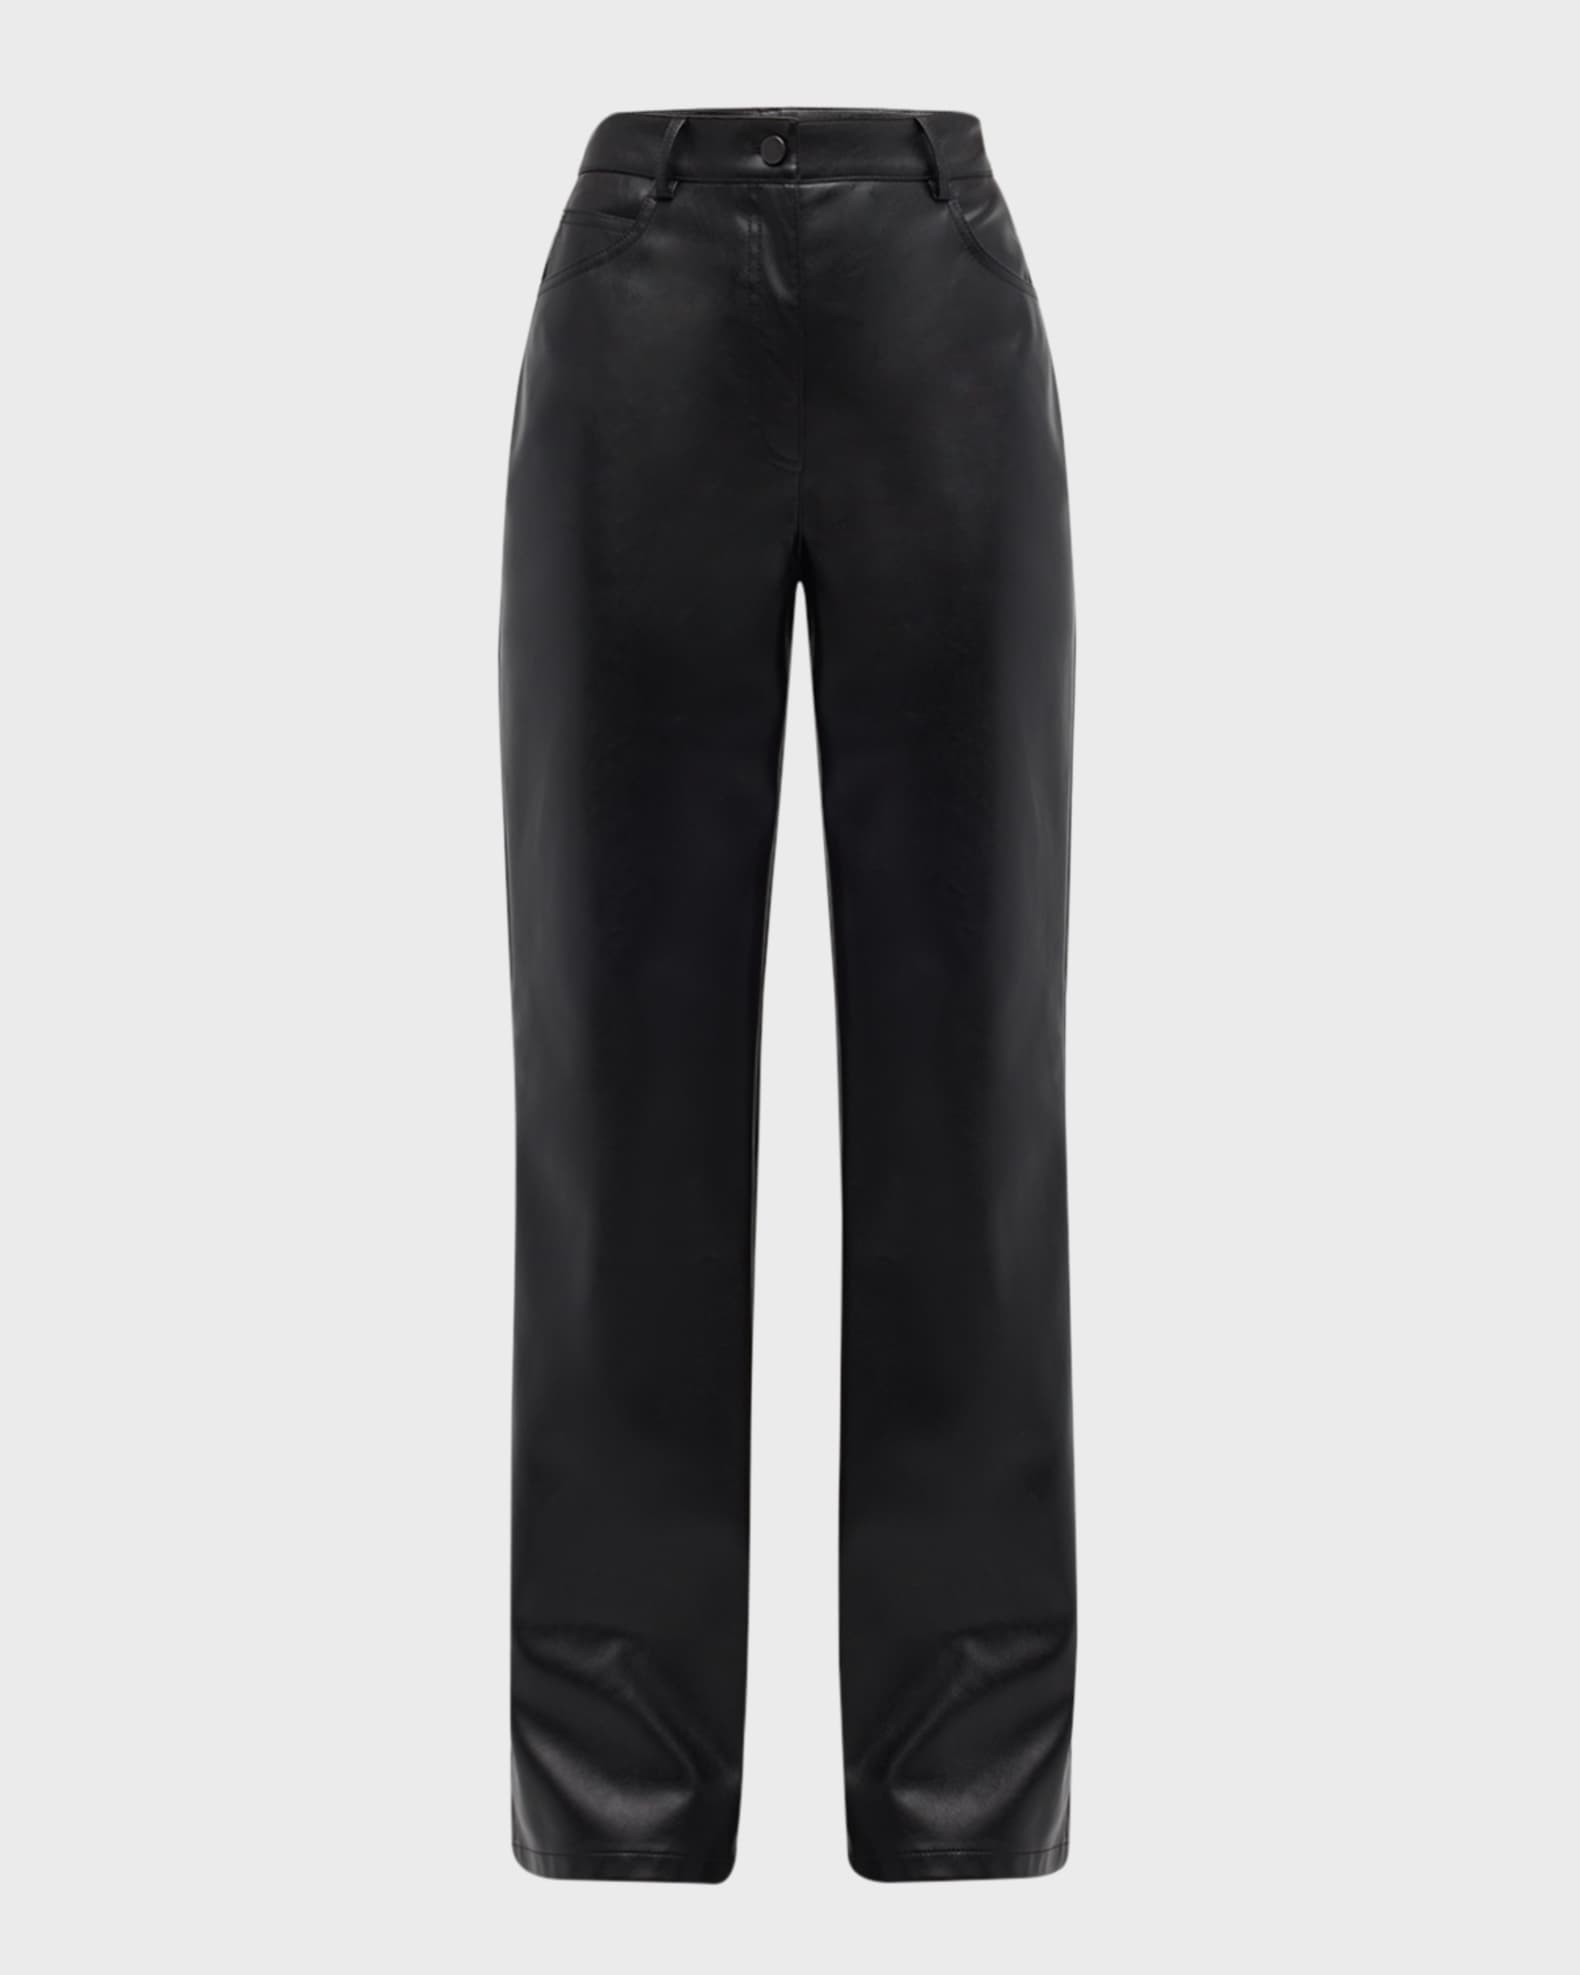 Akris punto Carrie Mid-Rise Faux Leather Straight Pants | Neiman Marcus